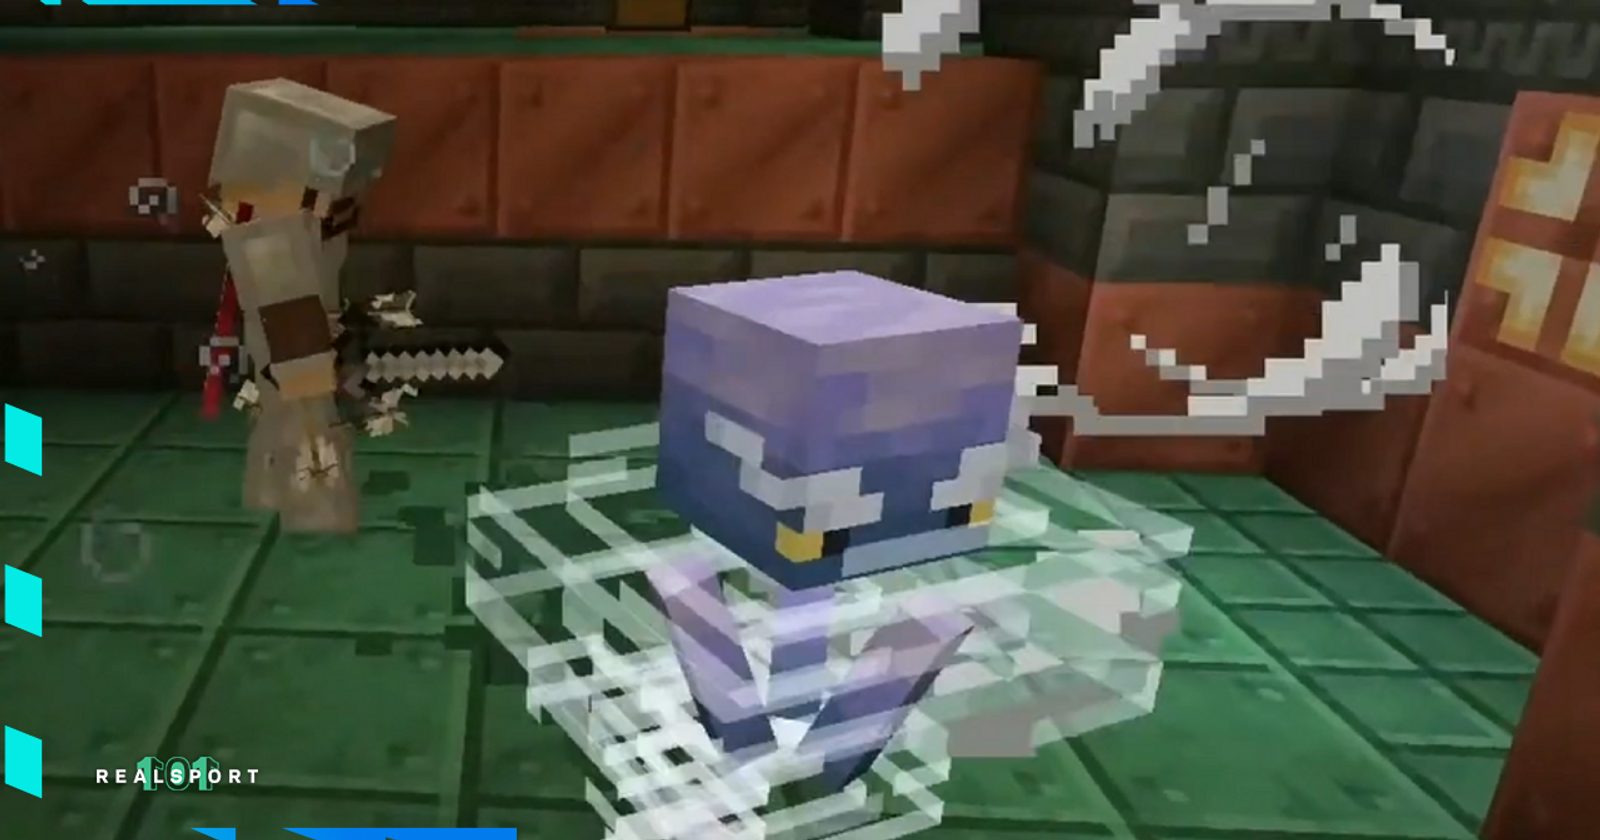 Minecraft unveils new mob ahead of update 1.21